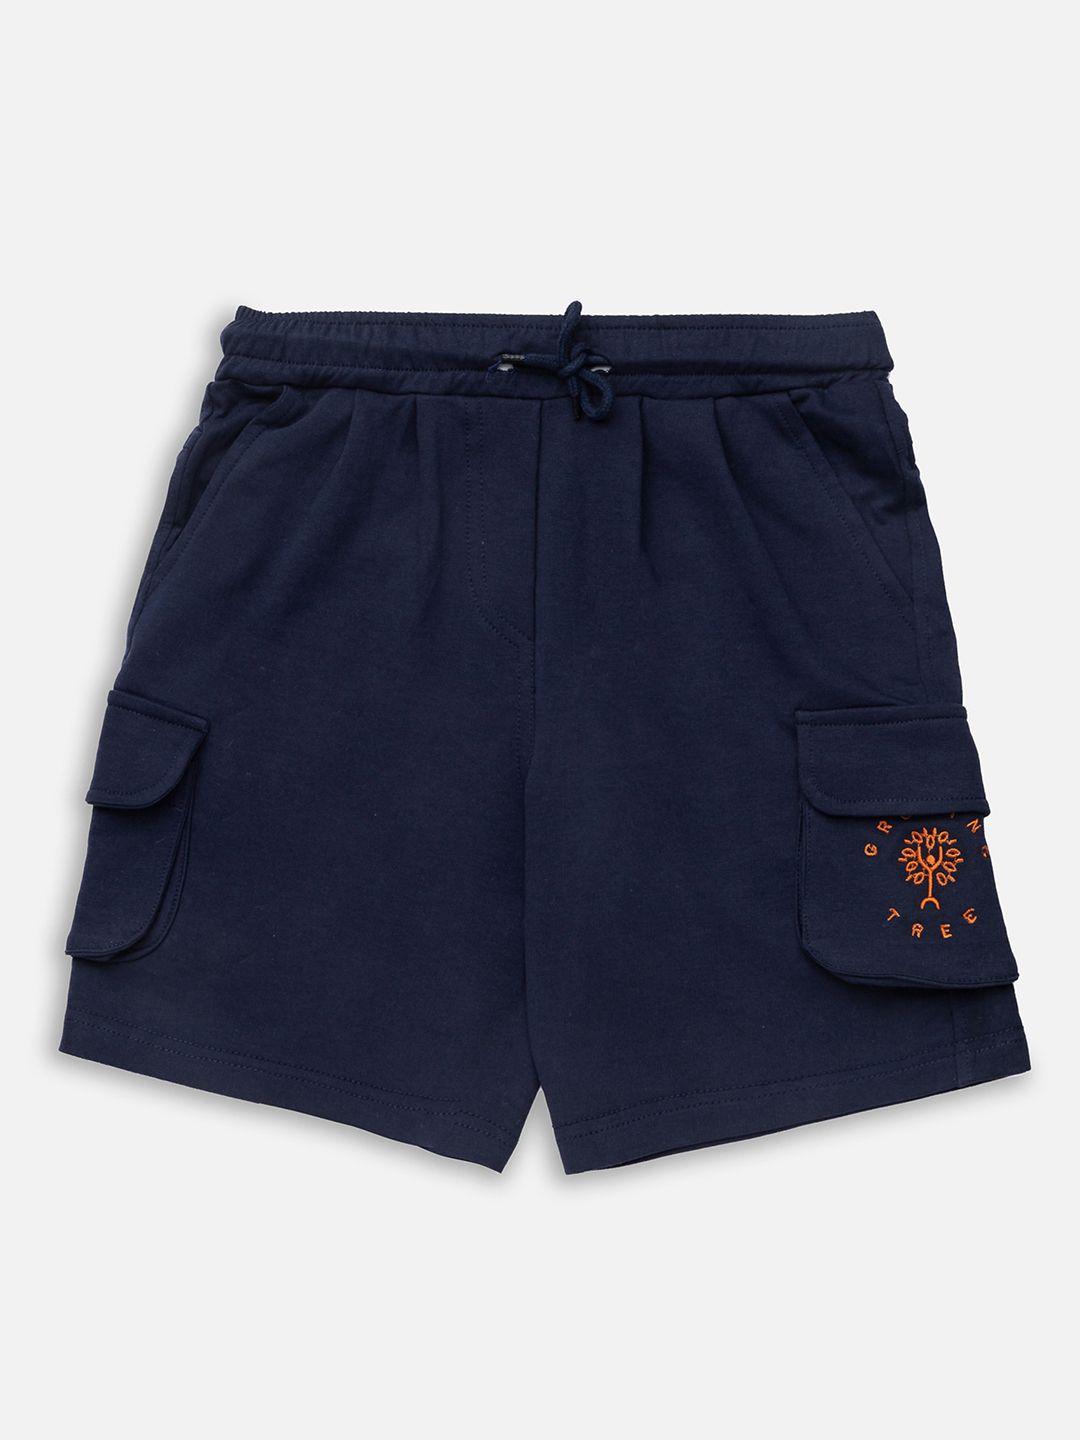 growing tree unisex kids navy blue outdoor antimicrobial technology shorts